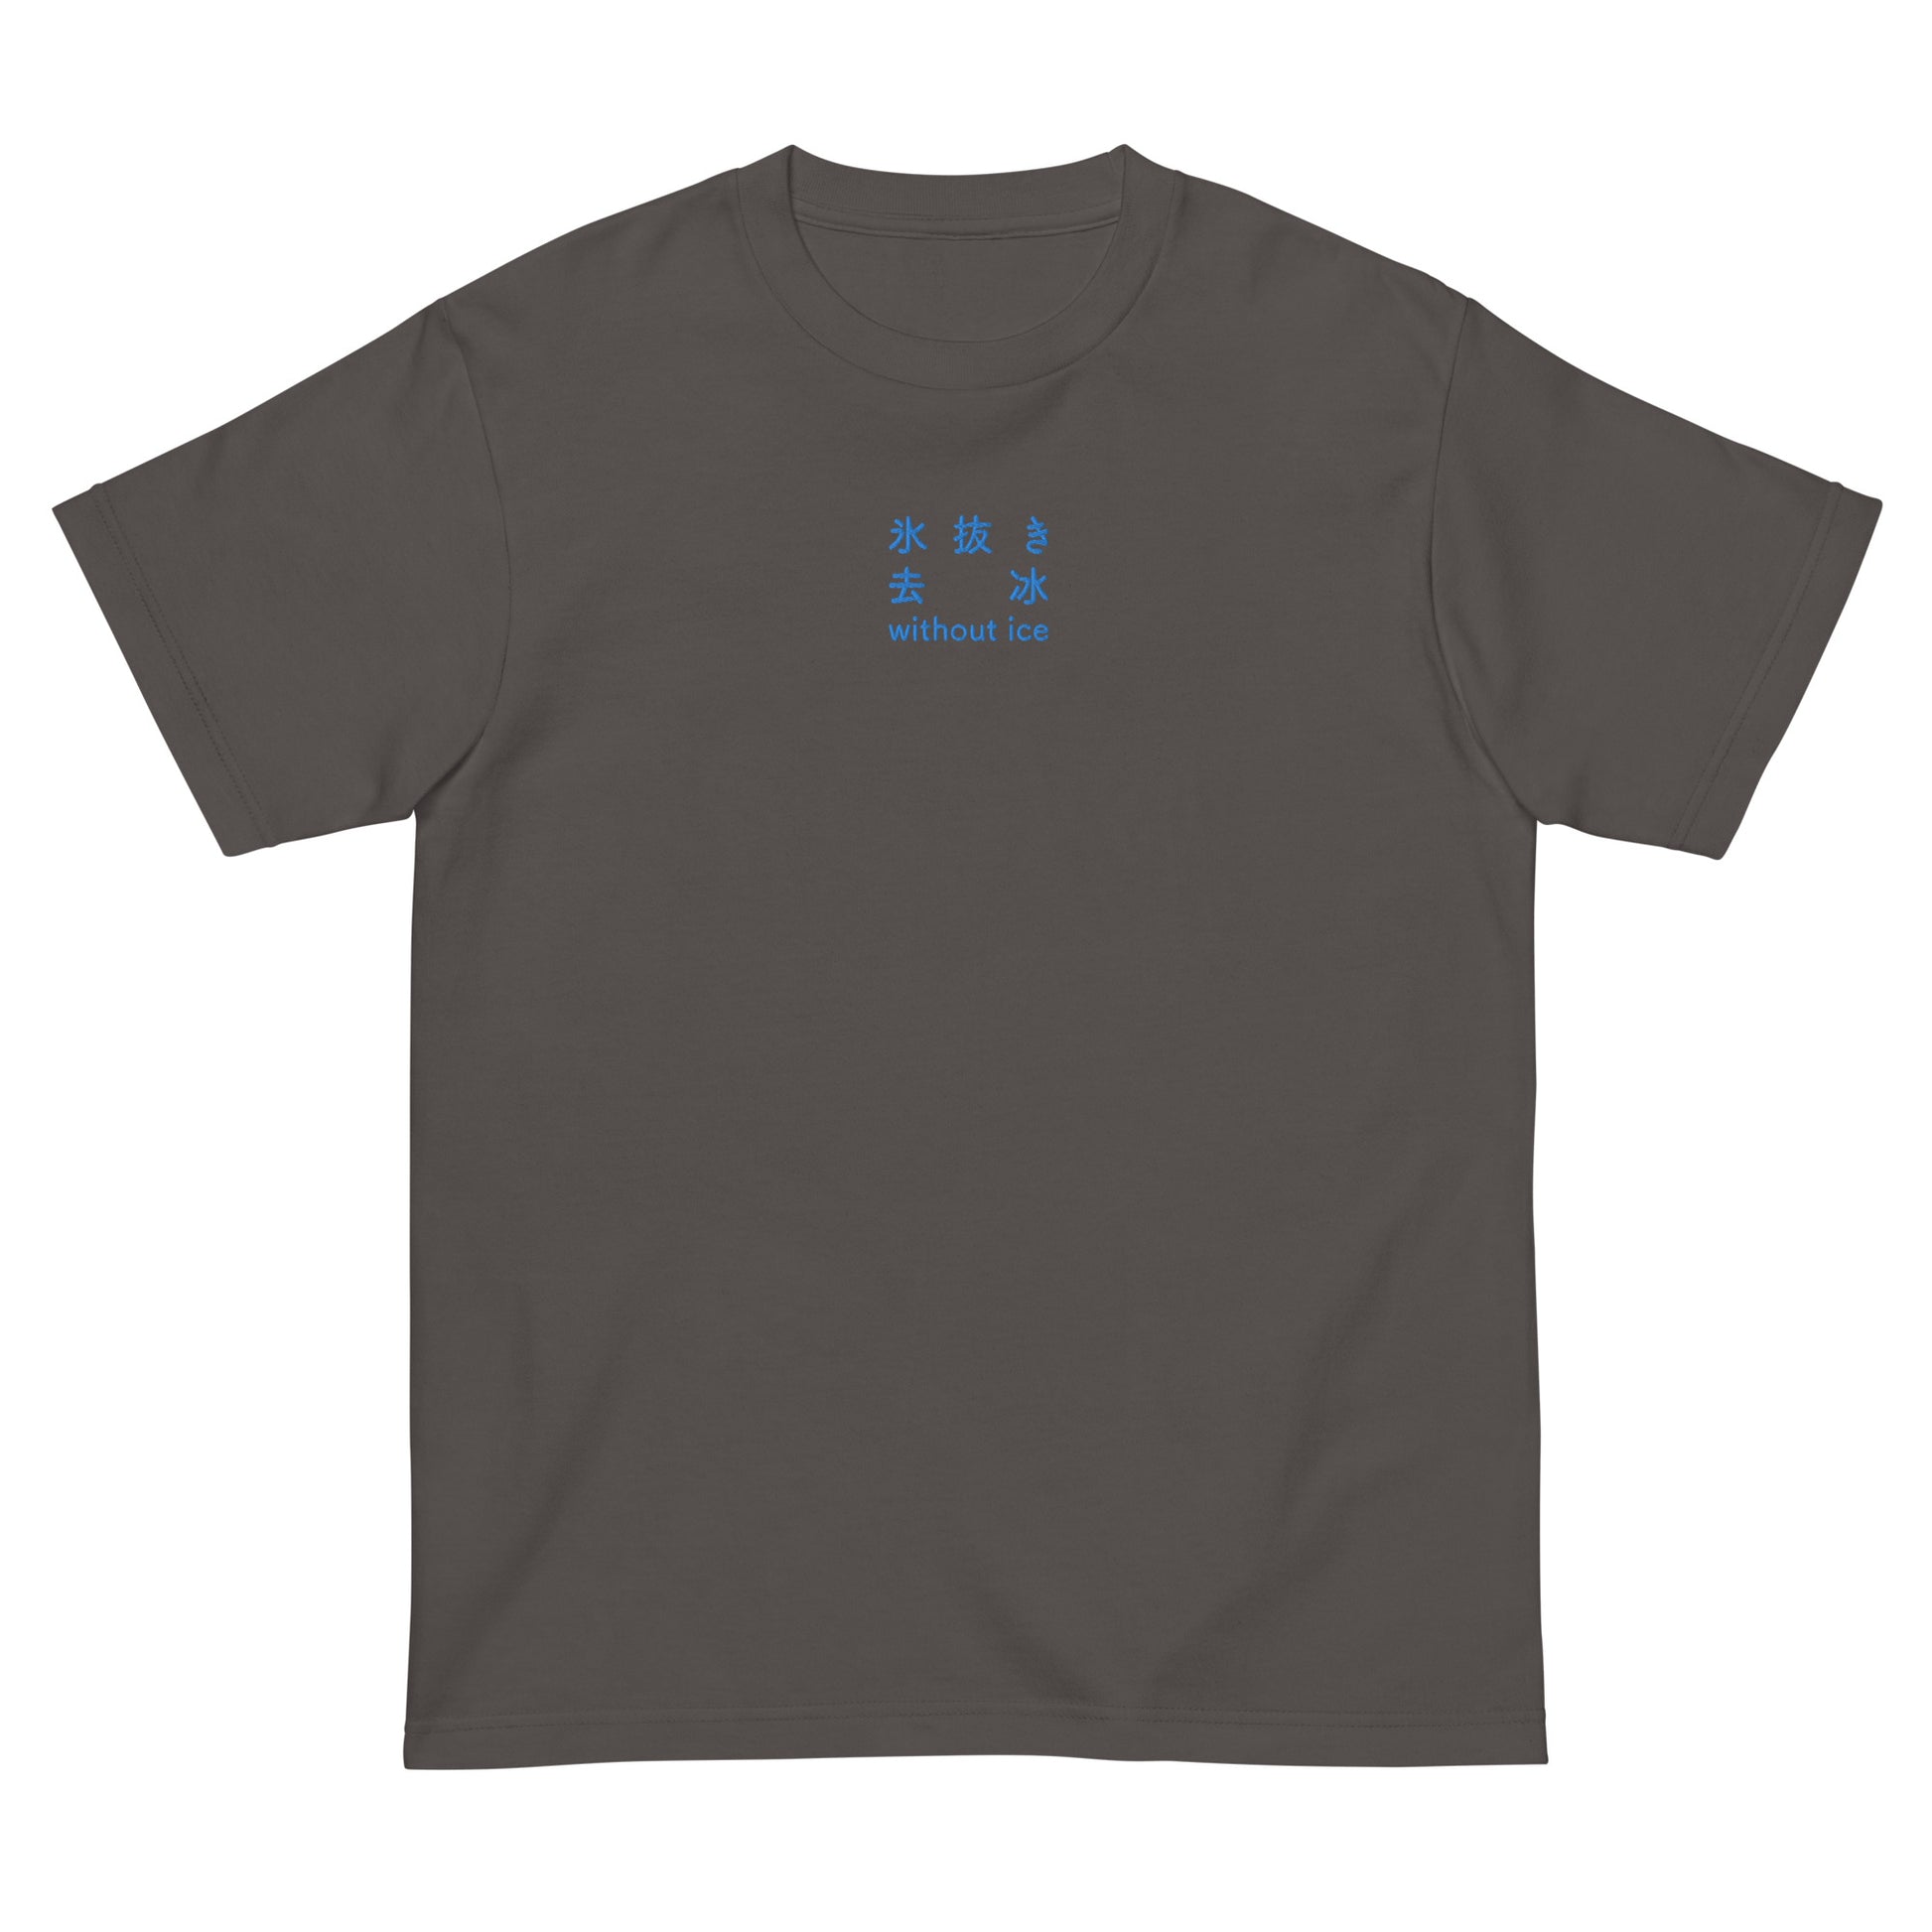 Dark Gray High Quality Tee - Front Design with an Blue Embroidery "Without Ice" in Japanese,Chinese and English